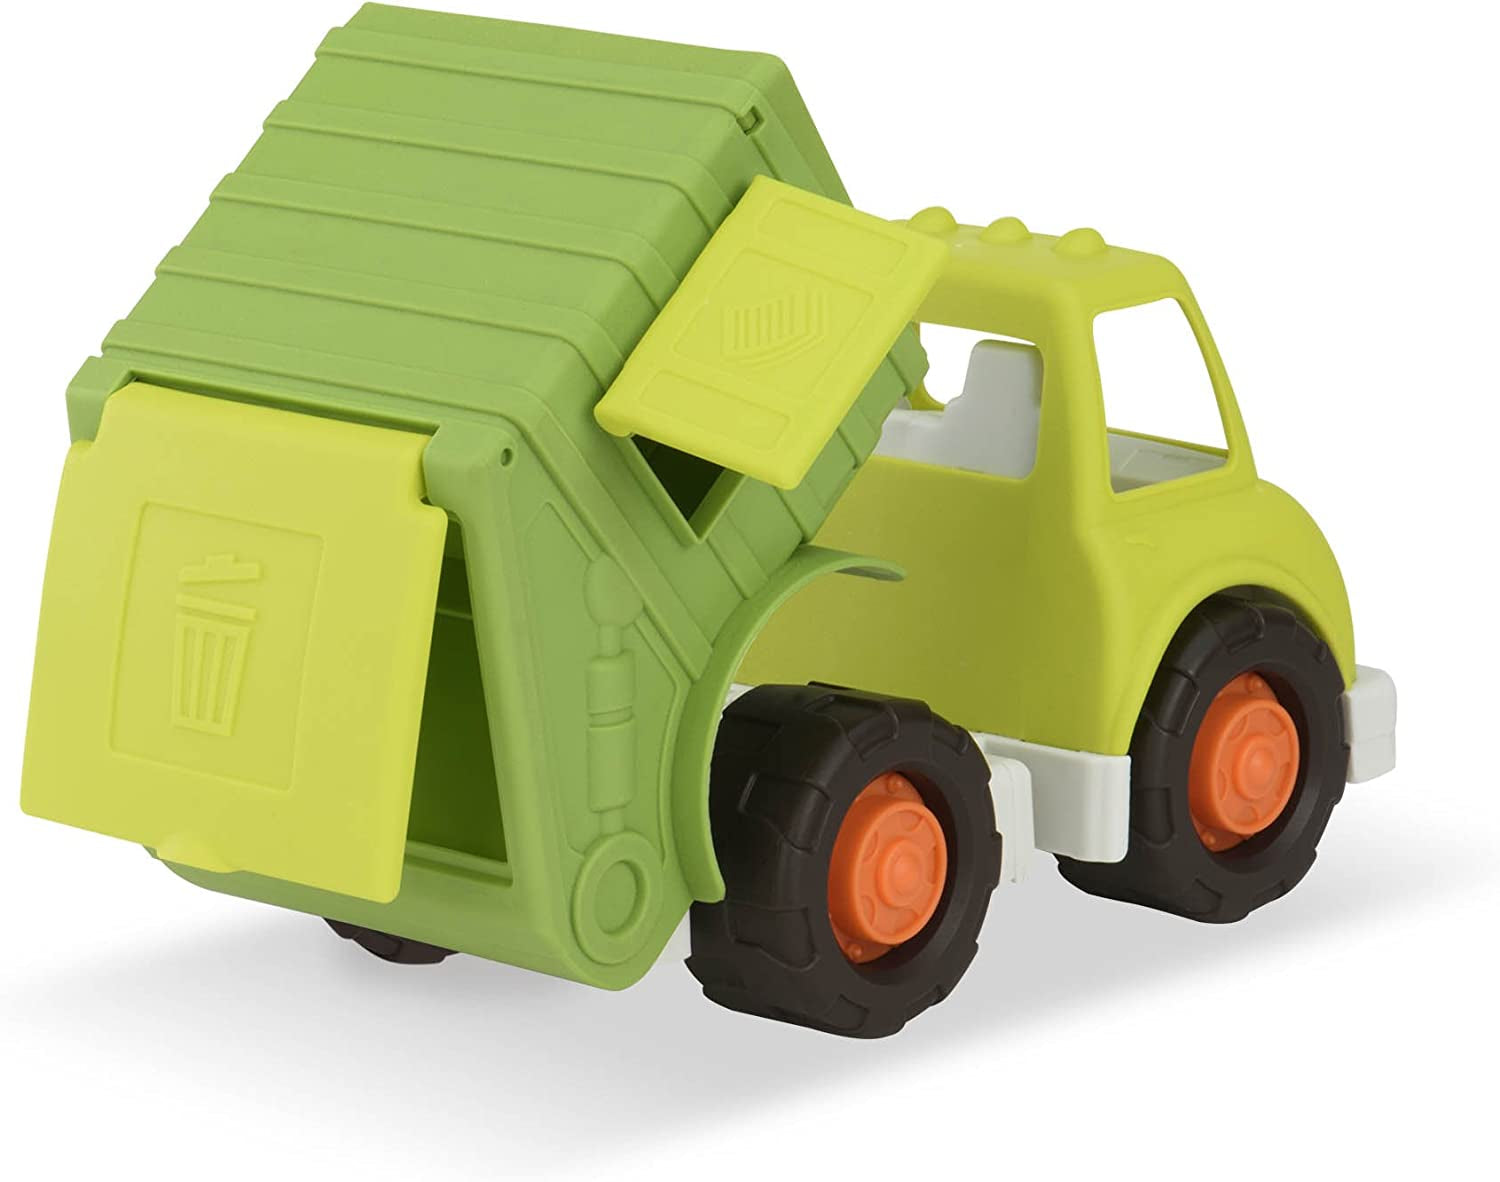 Wonder Wheels by Battat – Fire Truck, Recycling Truck, Excavator Truck – Combo of Recycling, Excavator, & Fire Truck Toys for Toddlers Age 1 & up (3 Pc) – 100% Recyclable